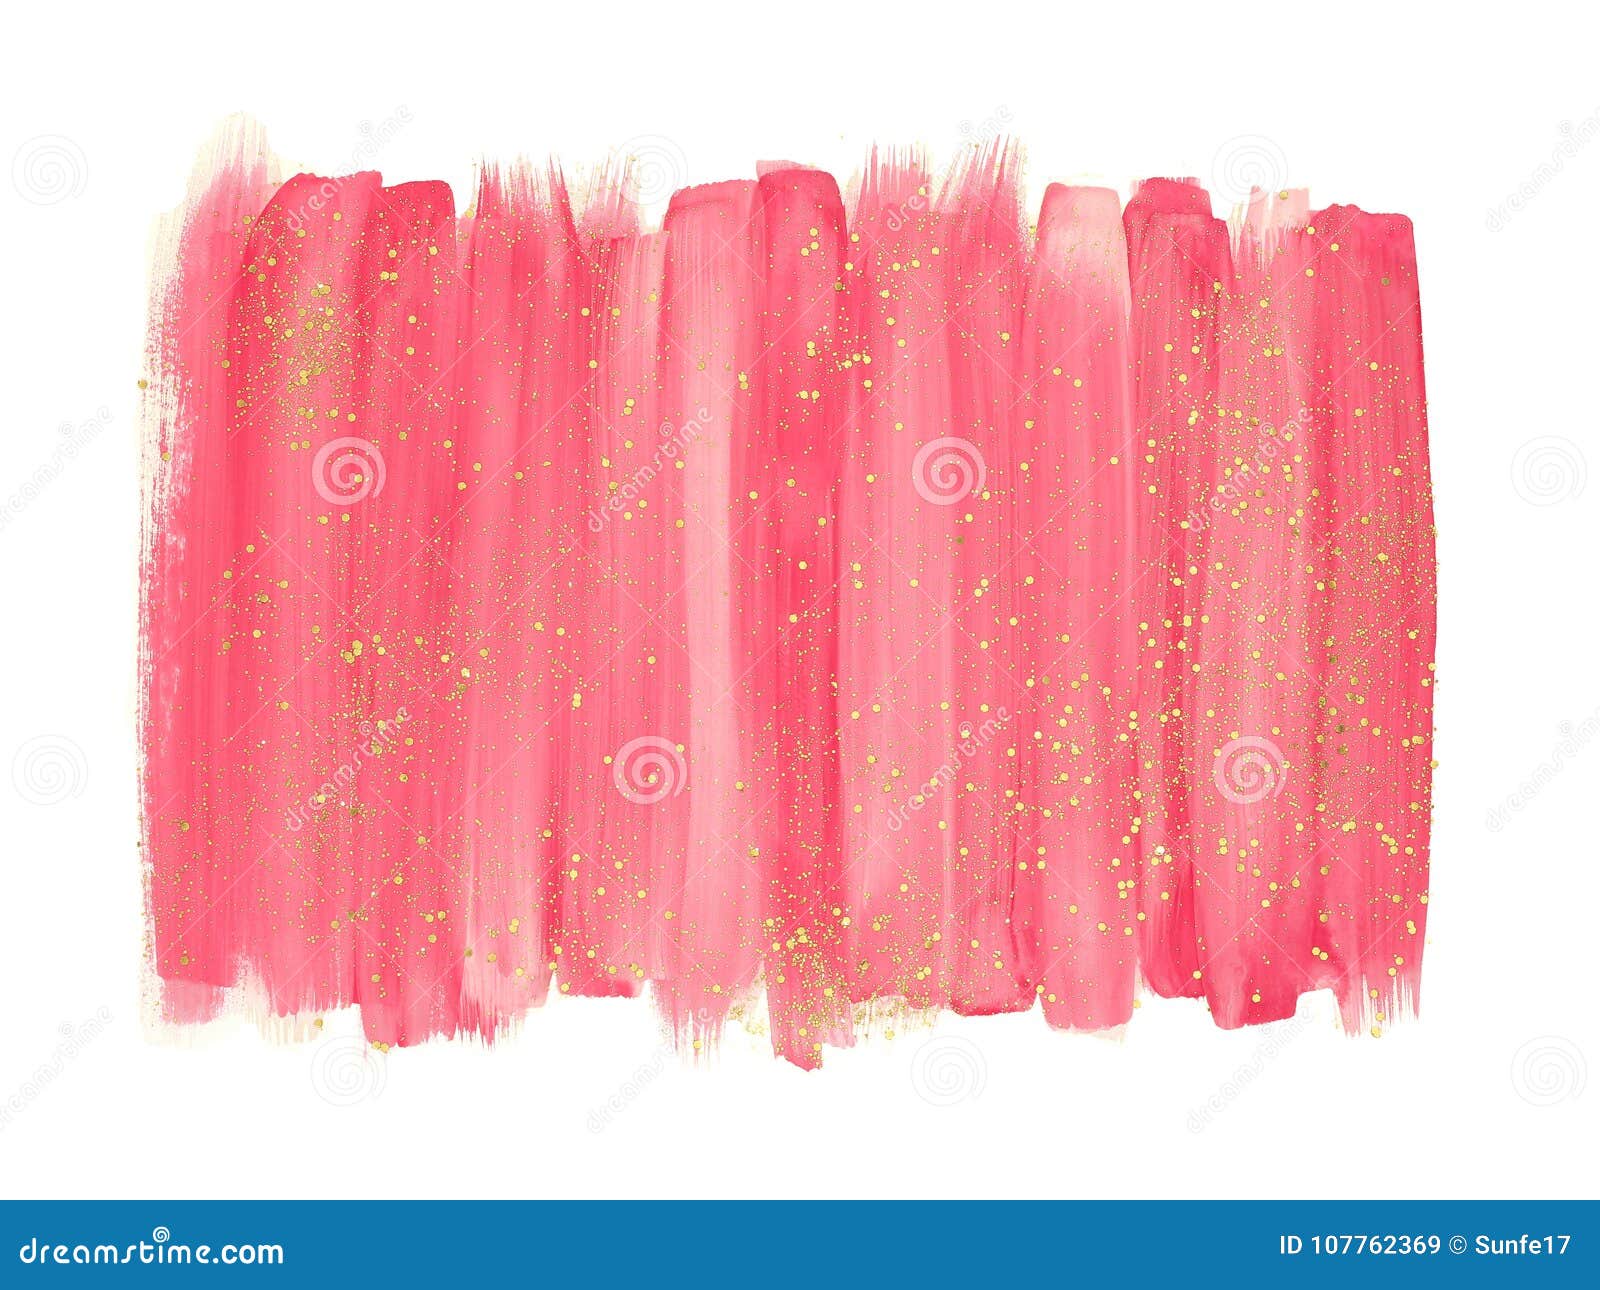 pink watercolor brush strokes with gold glitter